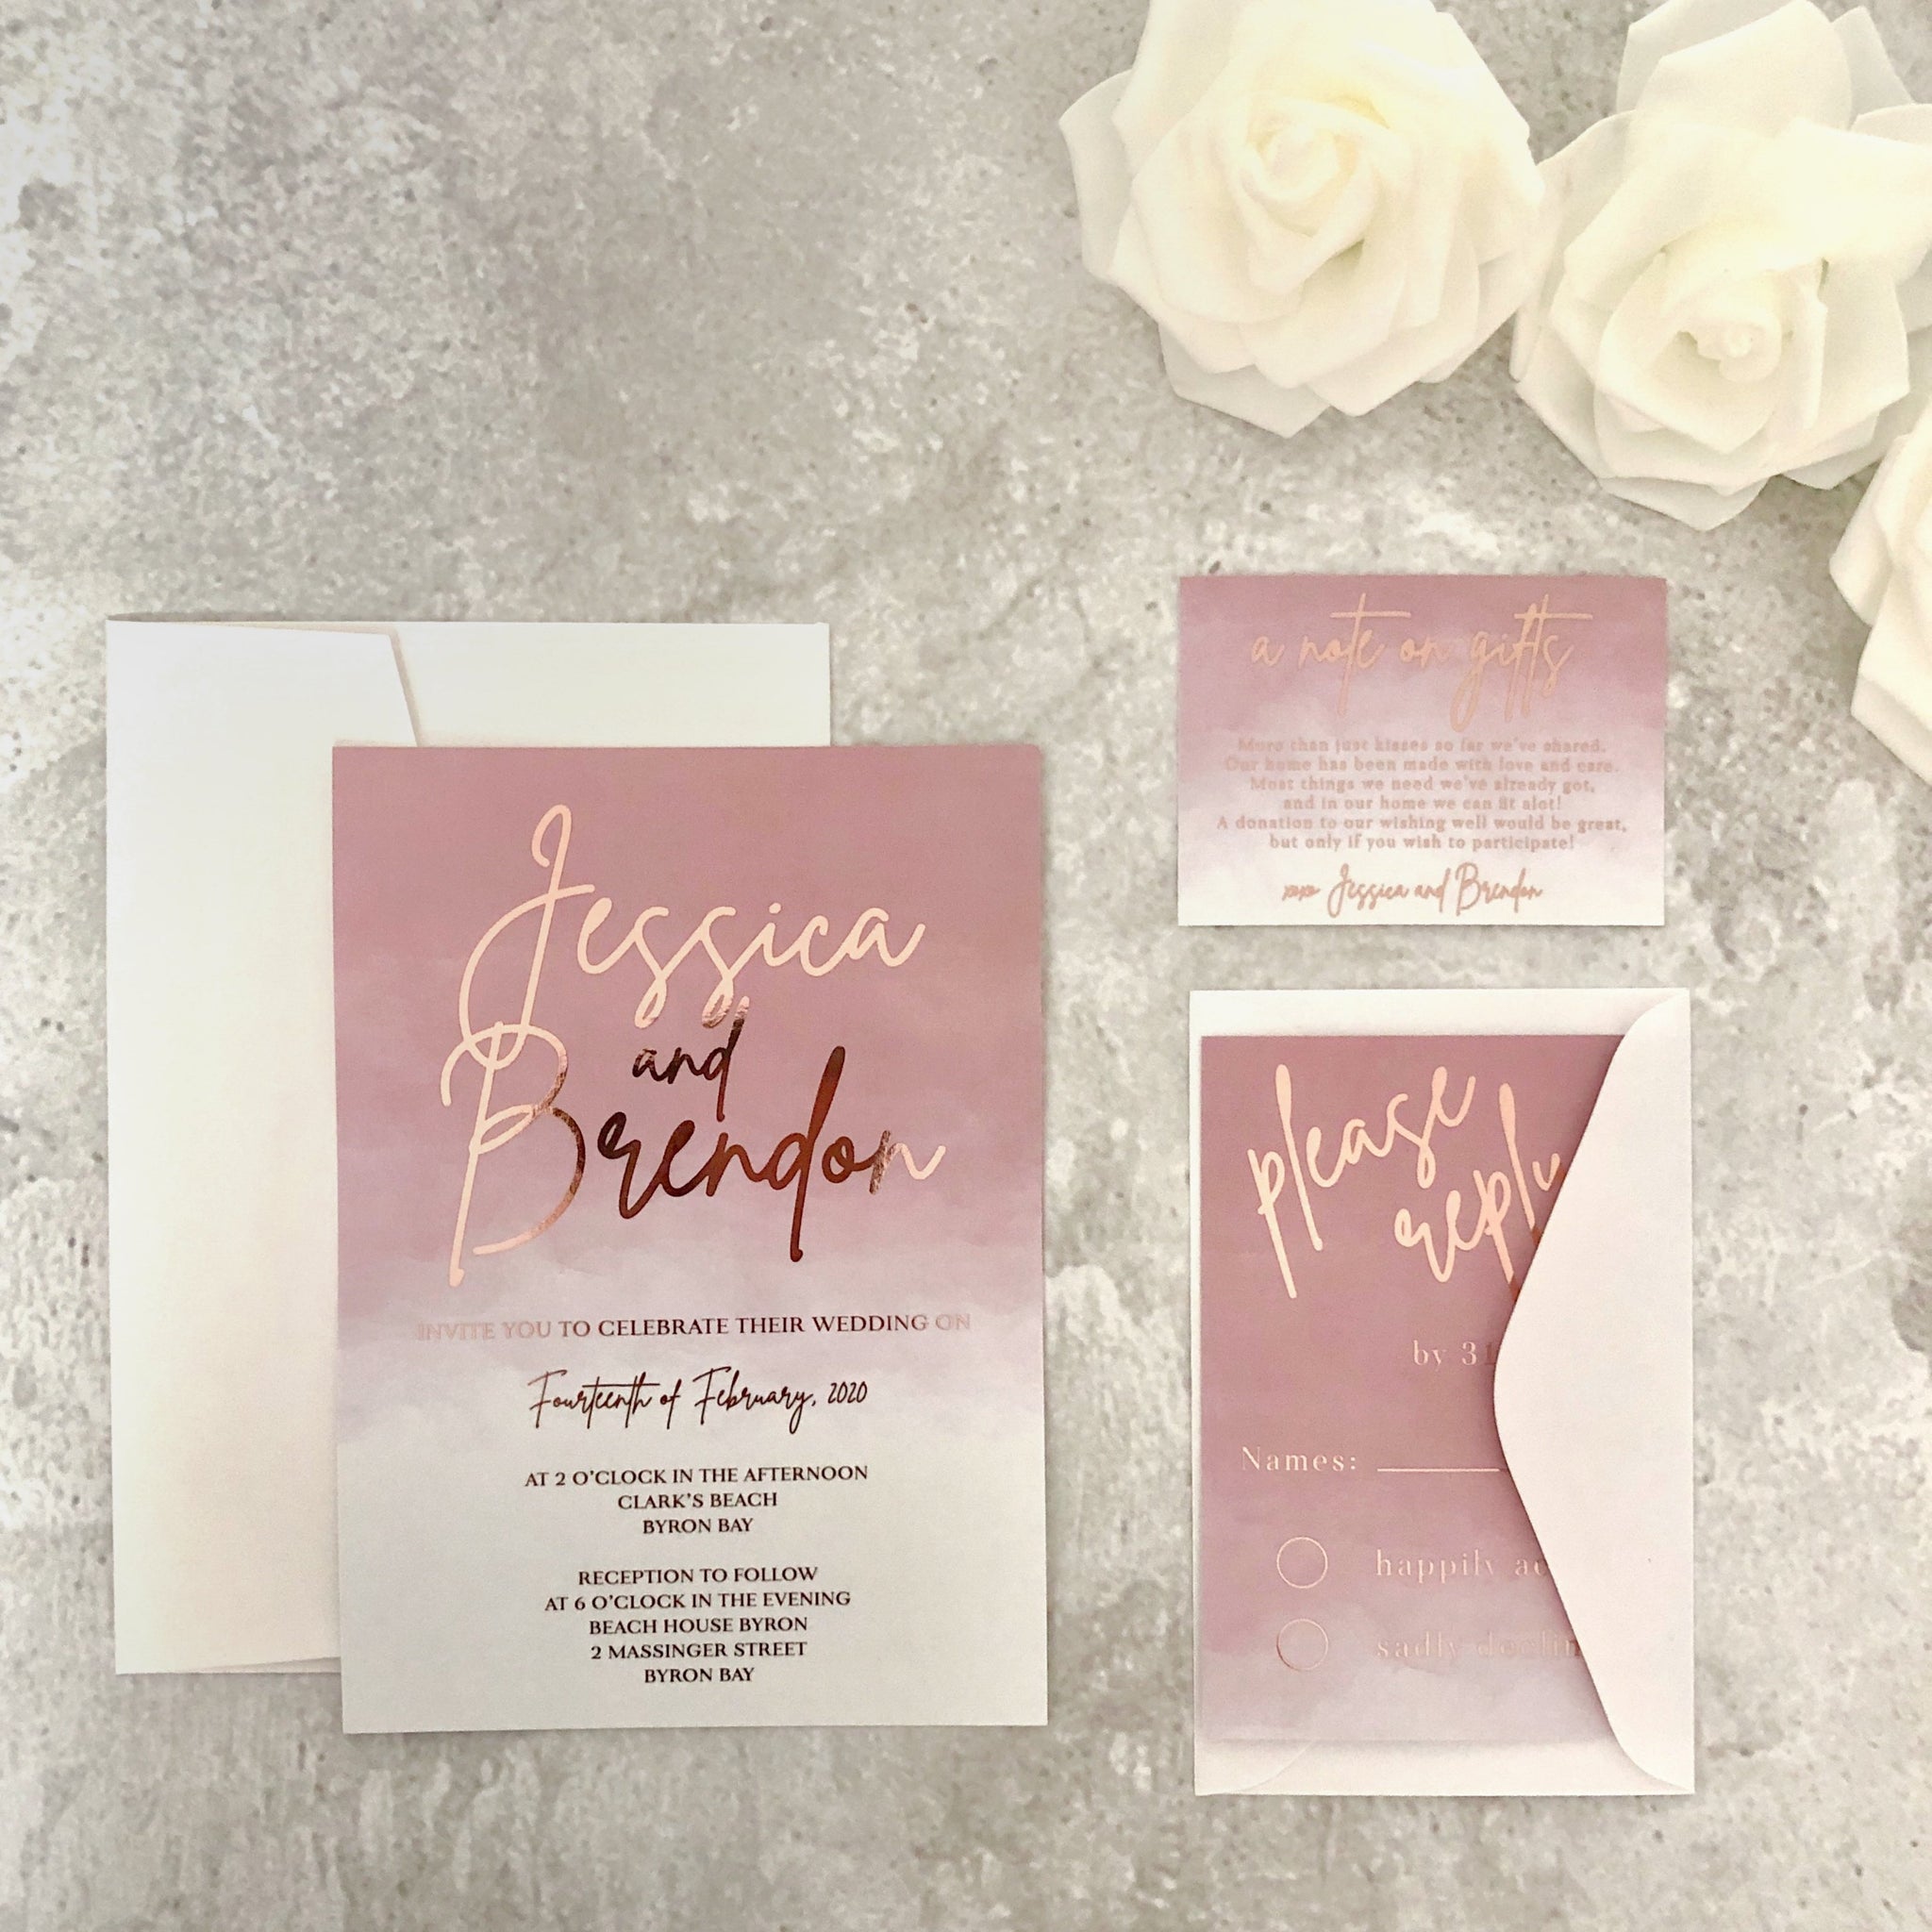 Rose Gold Foil Wedding Invitation in Dusty Pink ...